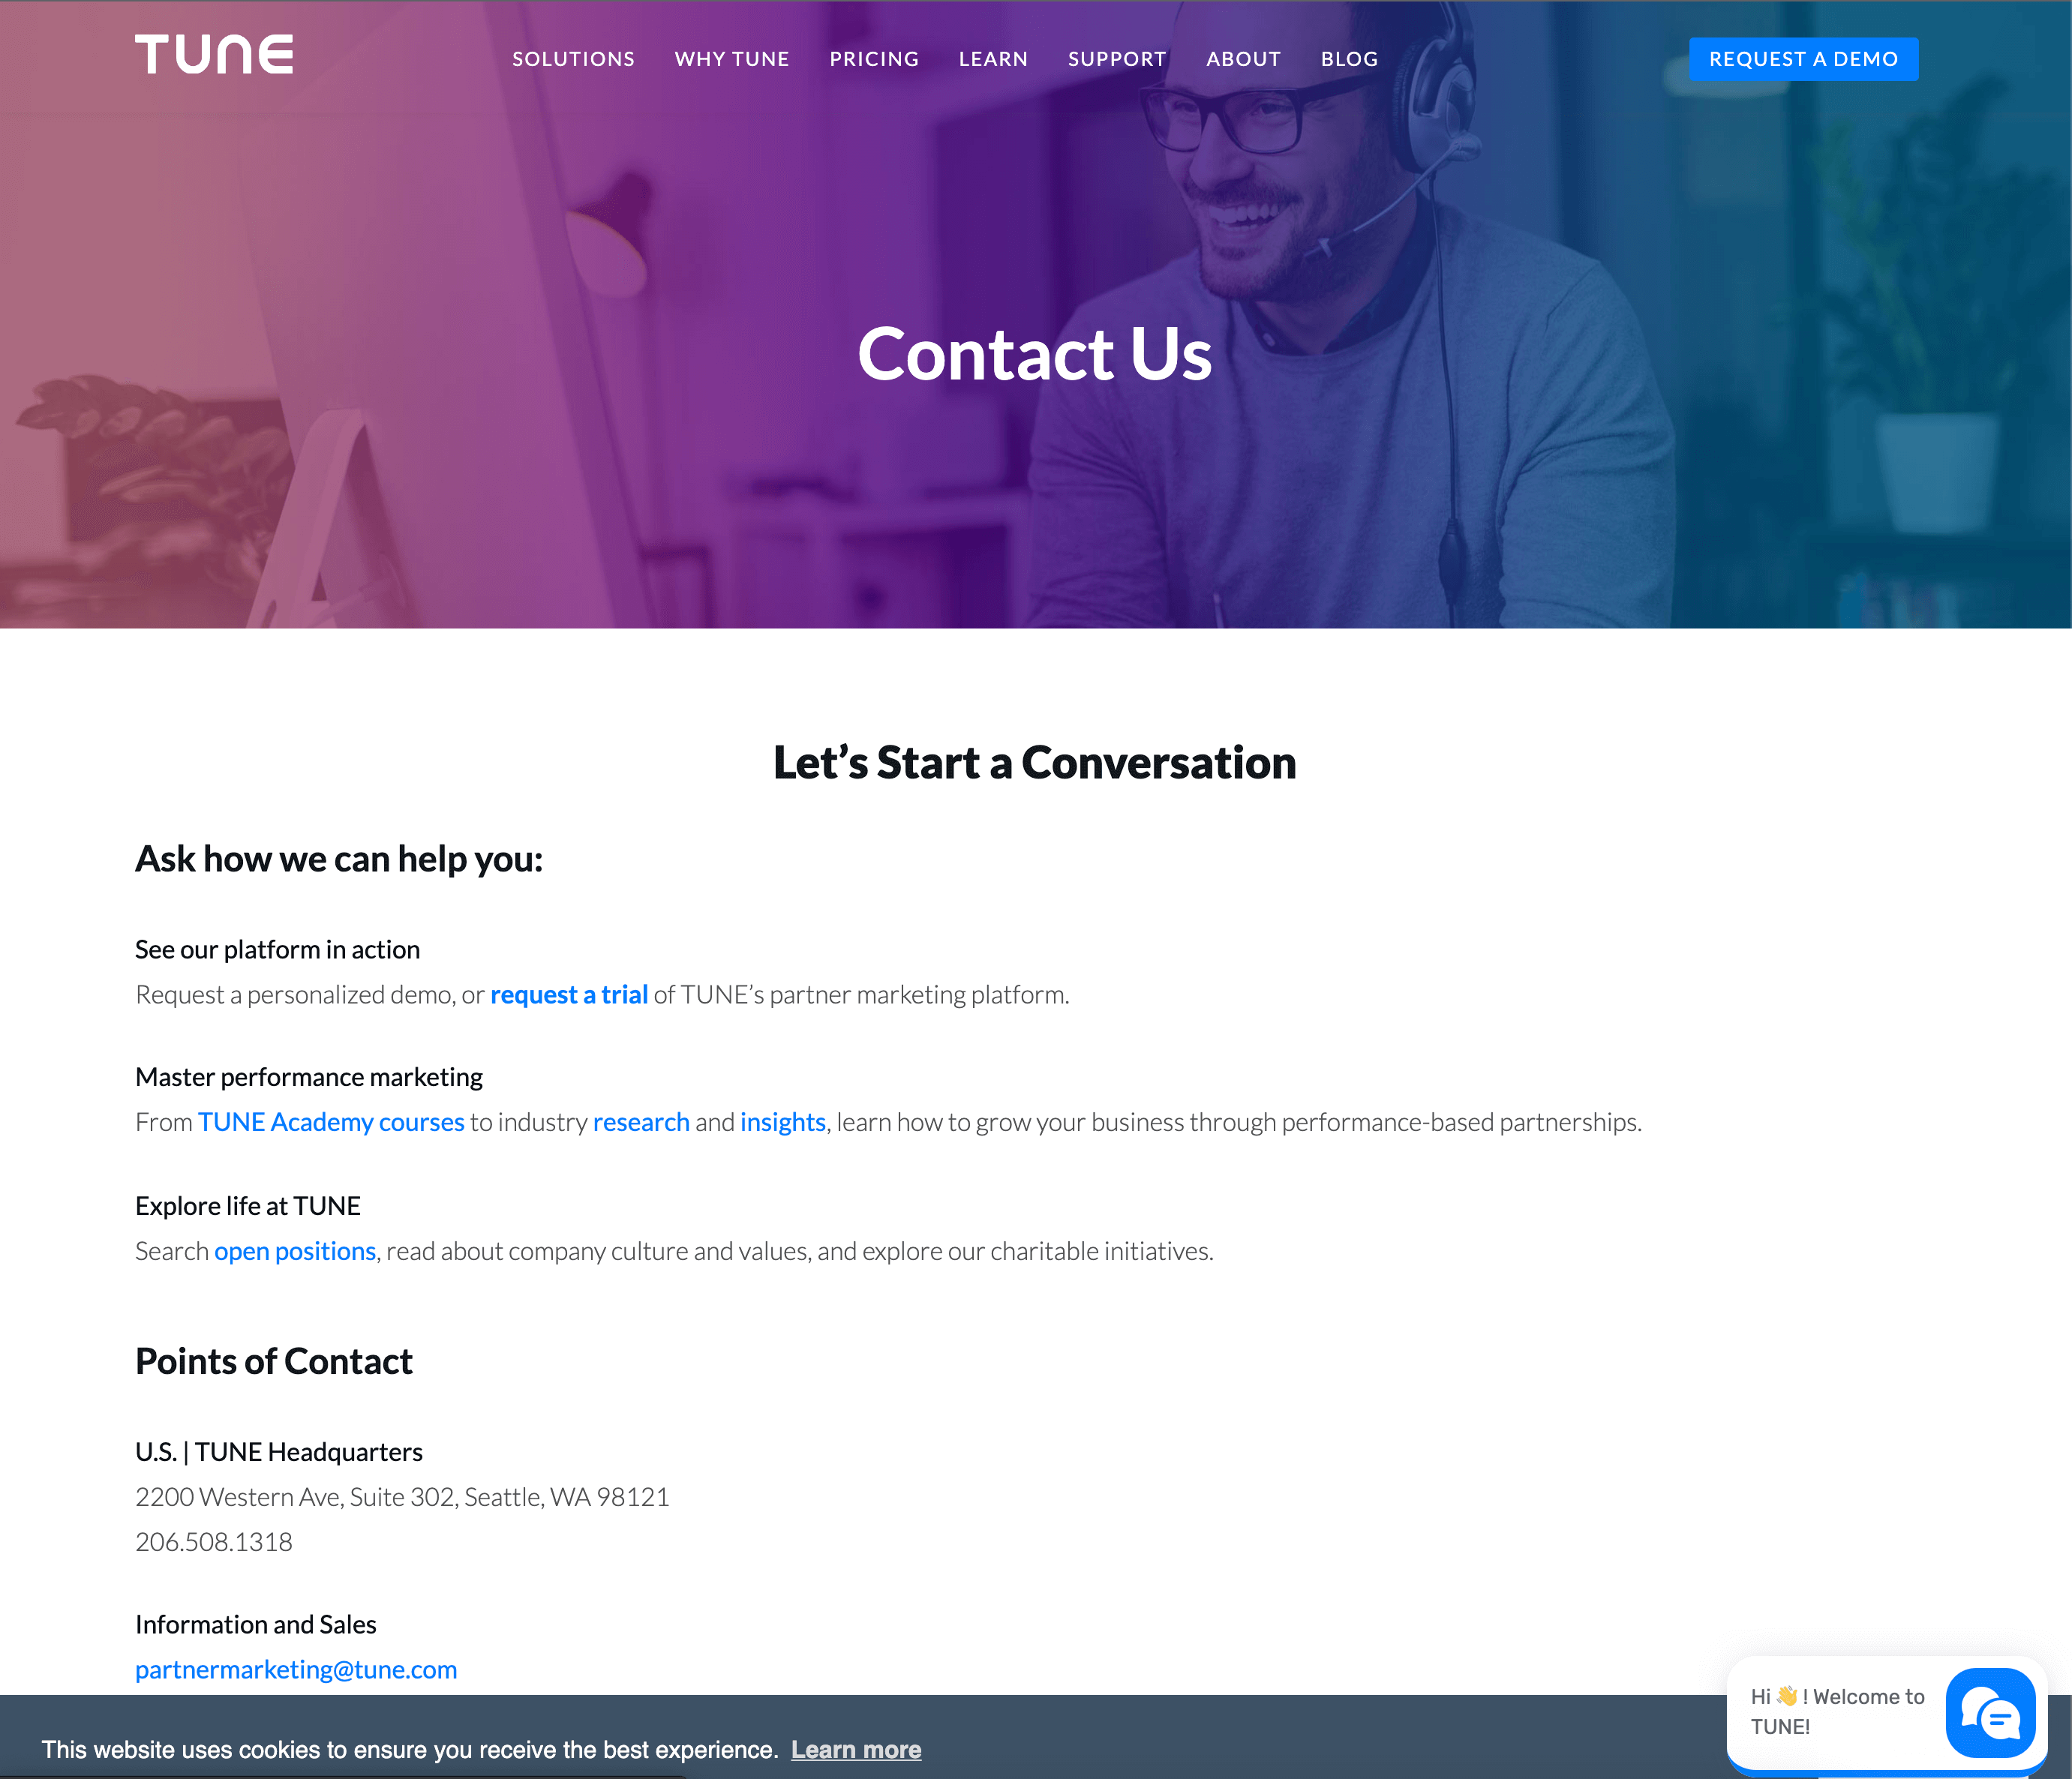 Tune's Contact Us Page